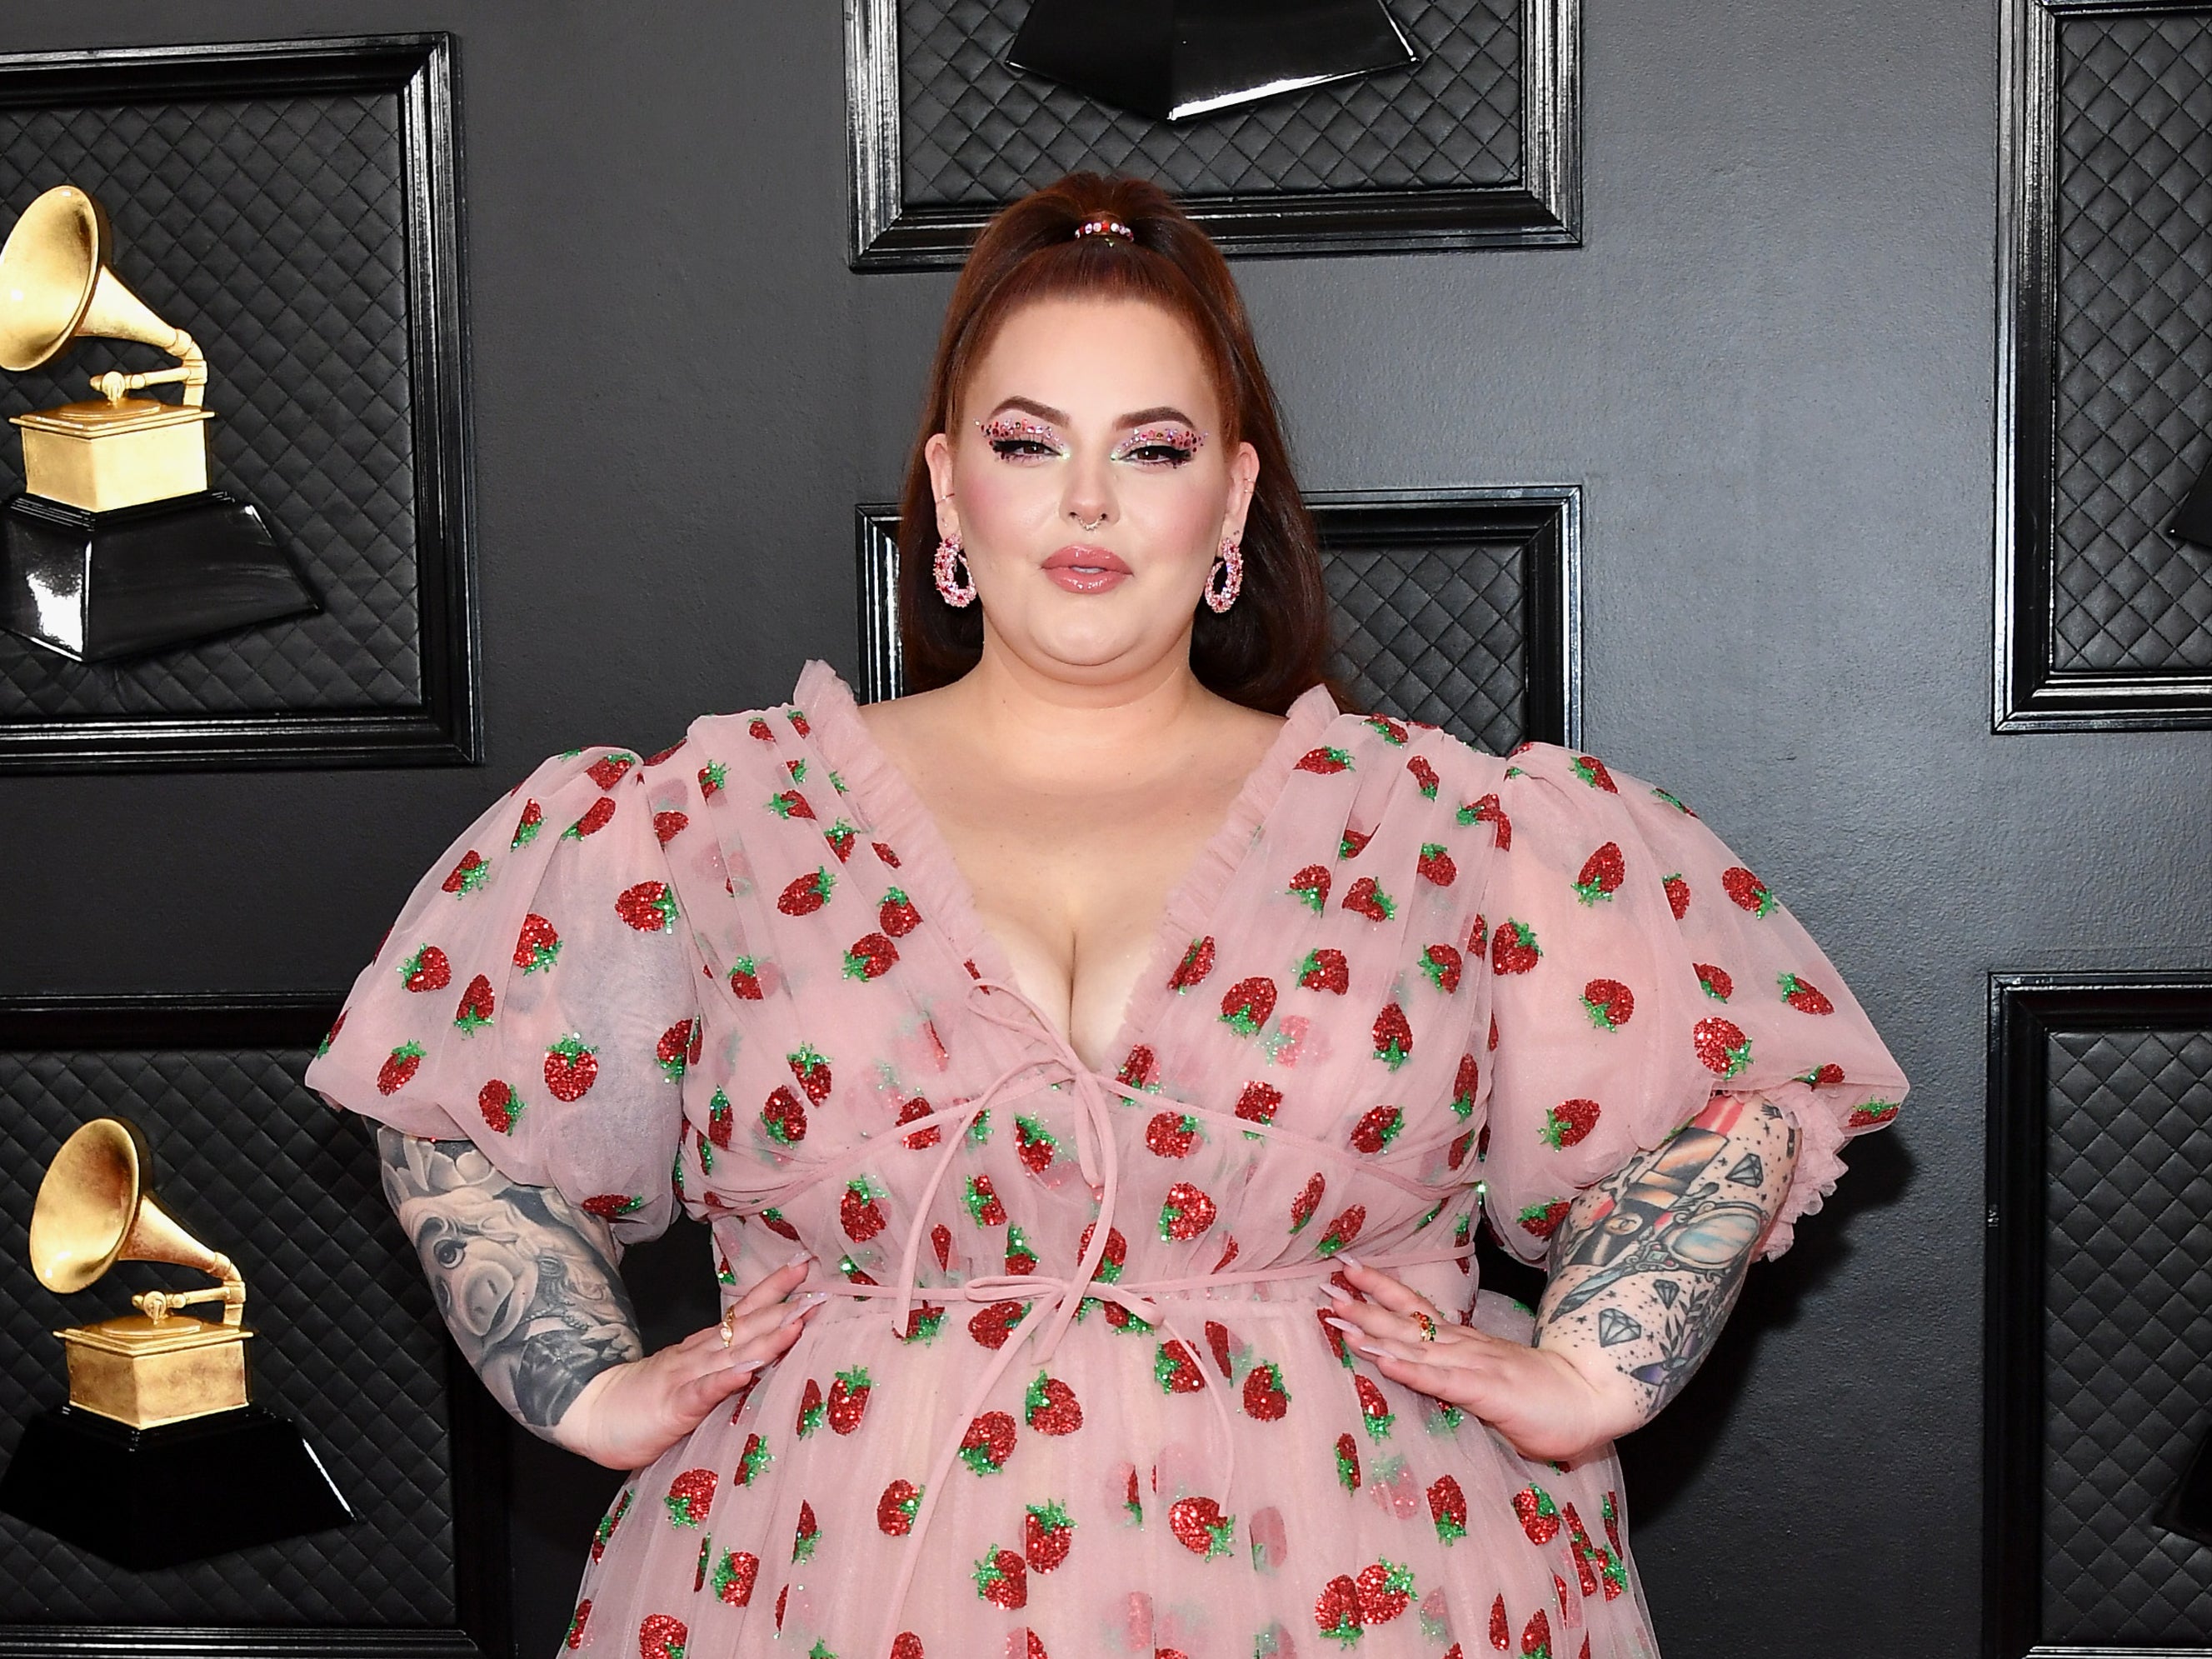 Tess Holliday accuses media of only publishing paparazzi photos of her eating